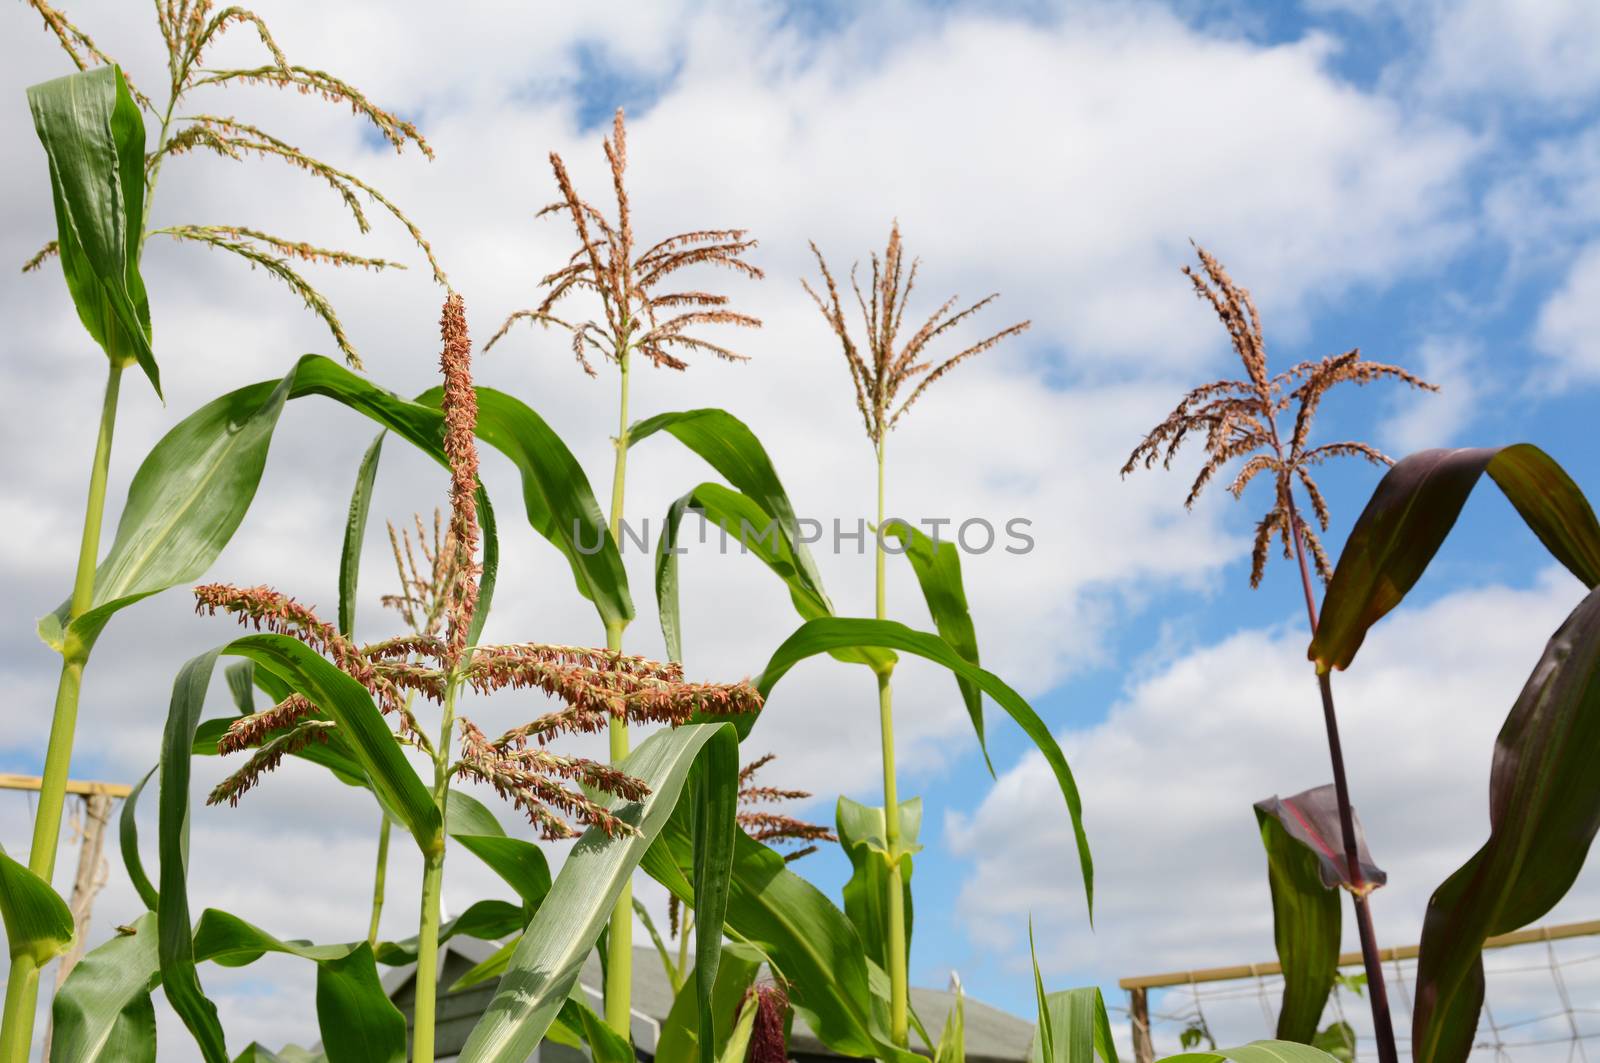 Pollen on a sweetcorn tassel in selective focus, with taller maize plants growing beyond, tassels against a cloudy summer sky